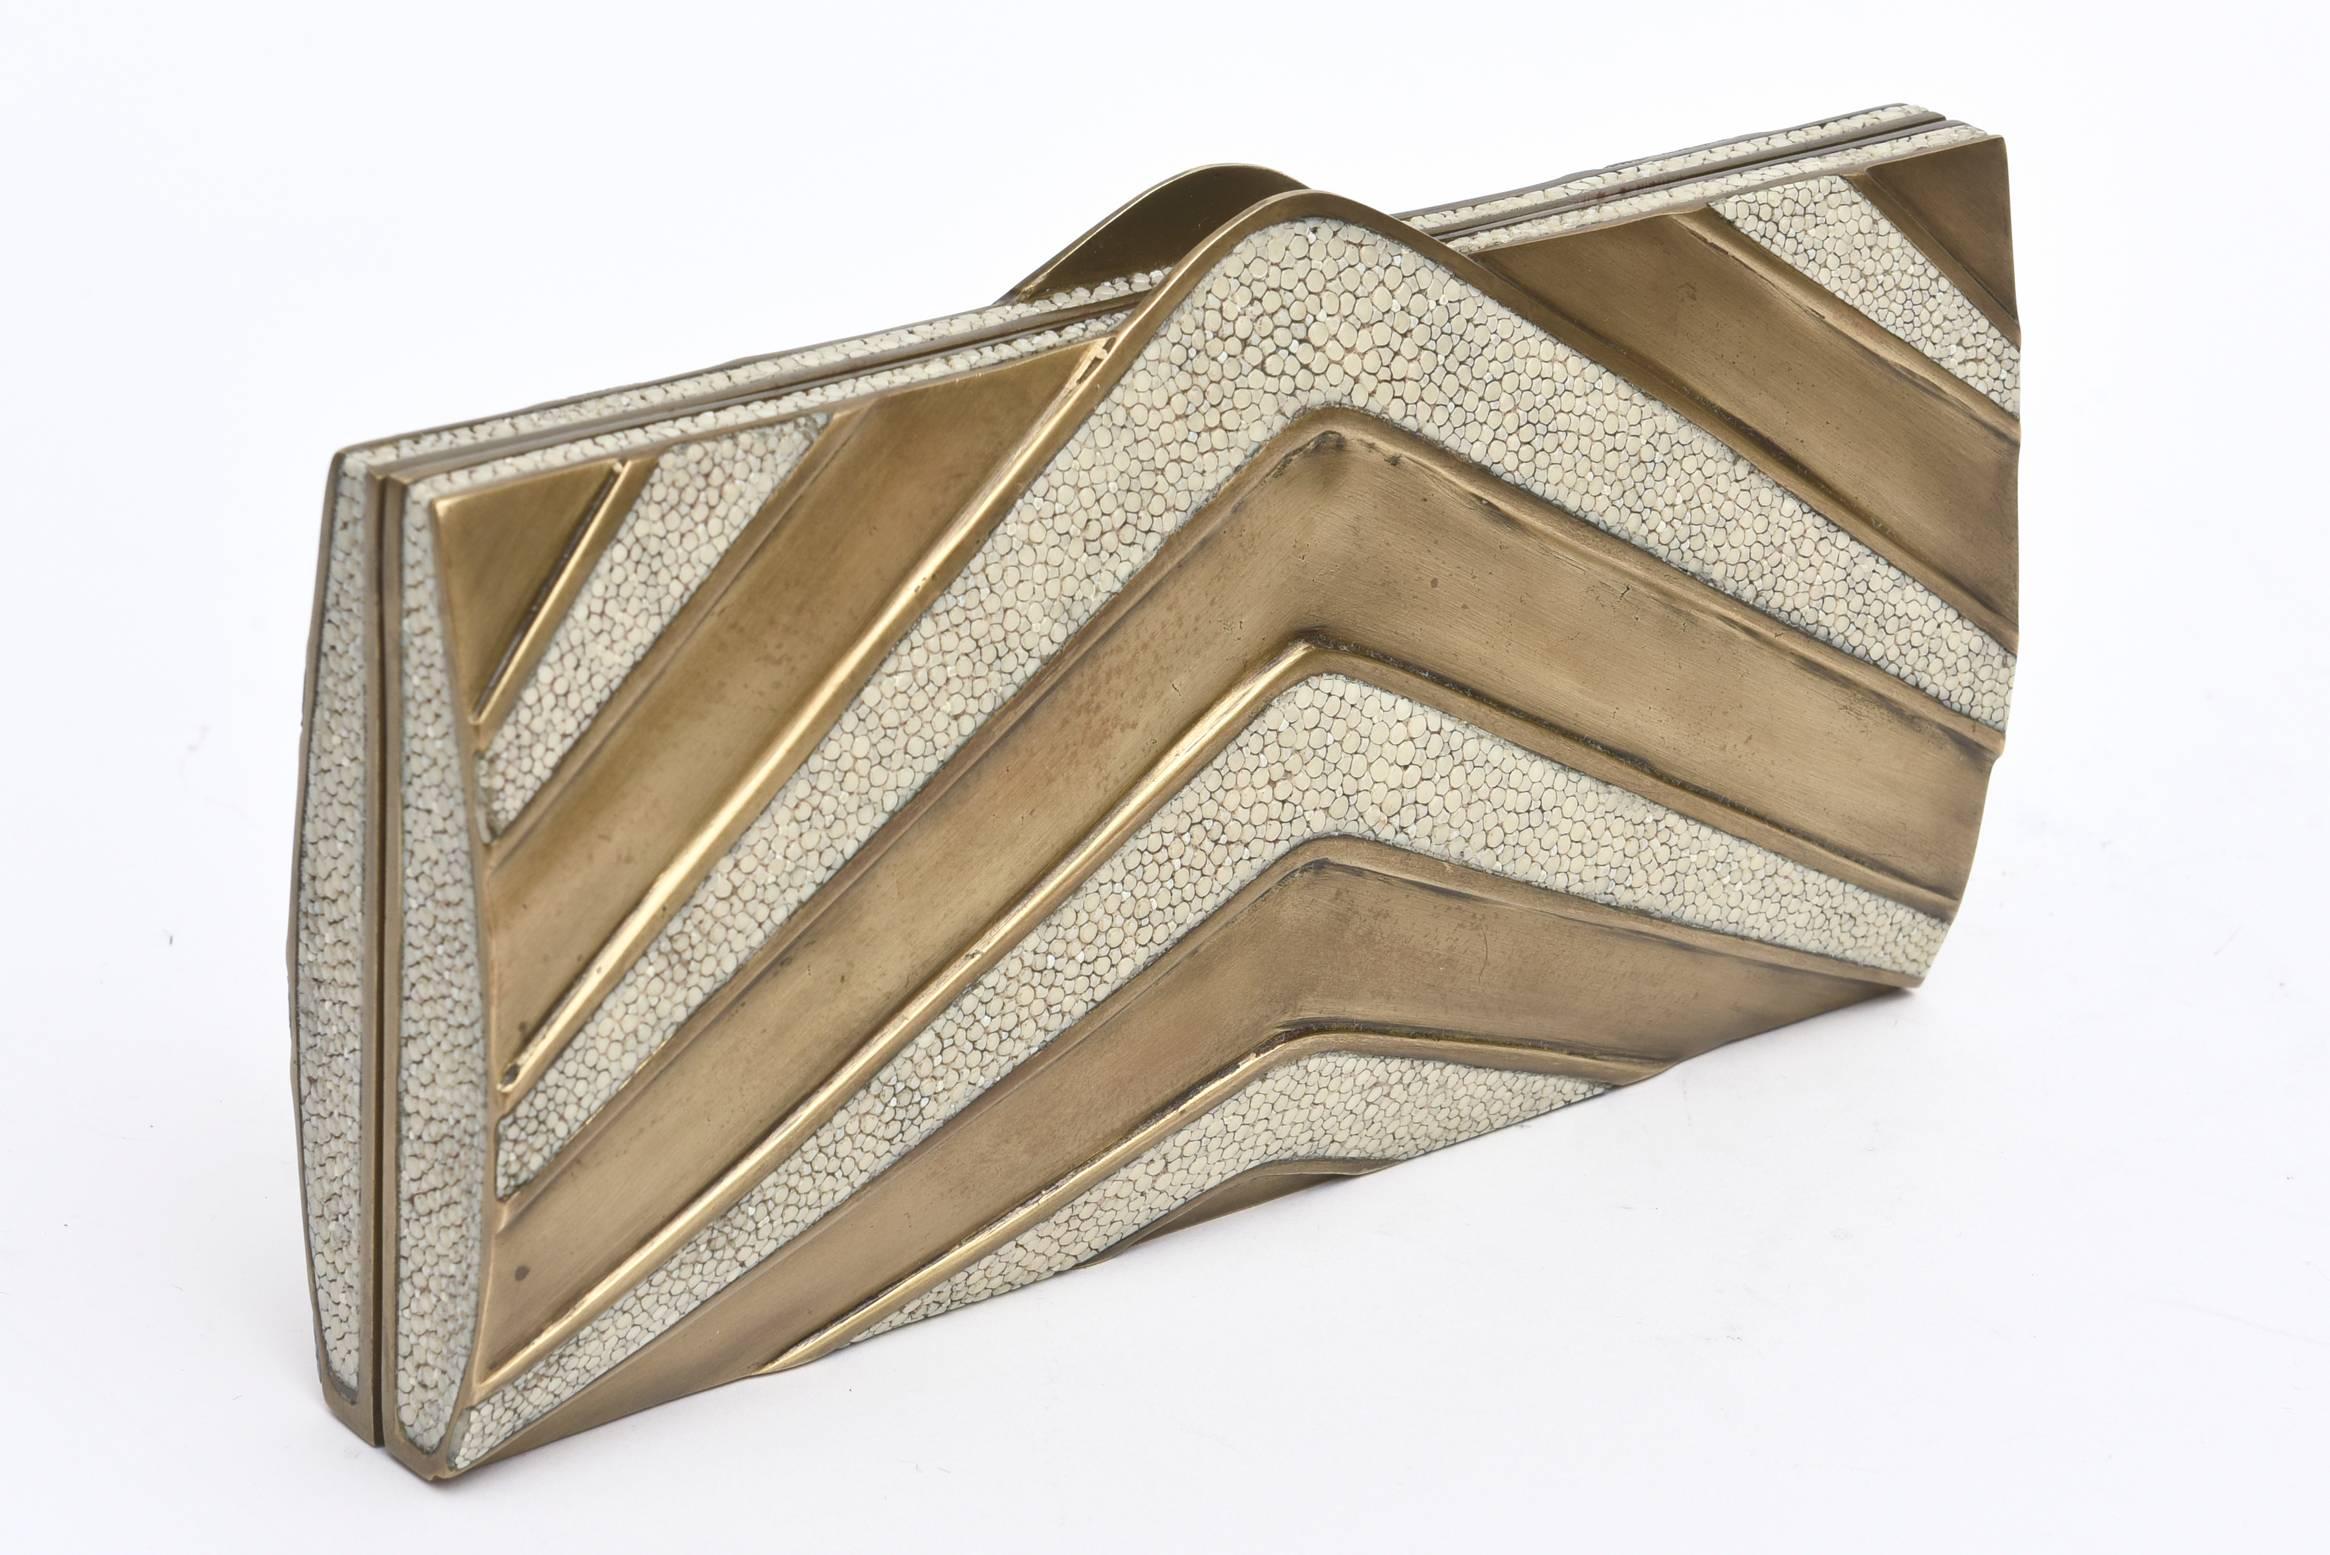 This stunning and almost new R&Y Augousti sculptural clutch is a statement piece. The elements are shagreen and brass. It is has some weight to it.  It holds an I Phone 6 or 6 S. The alternating zig zag pattern between stingray and brass gives it